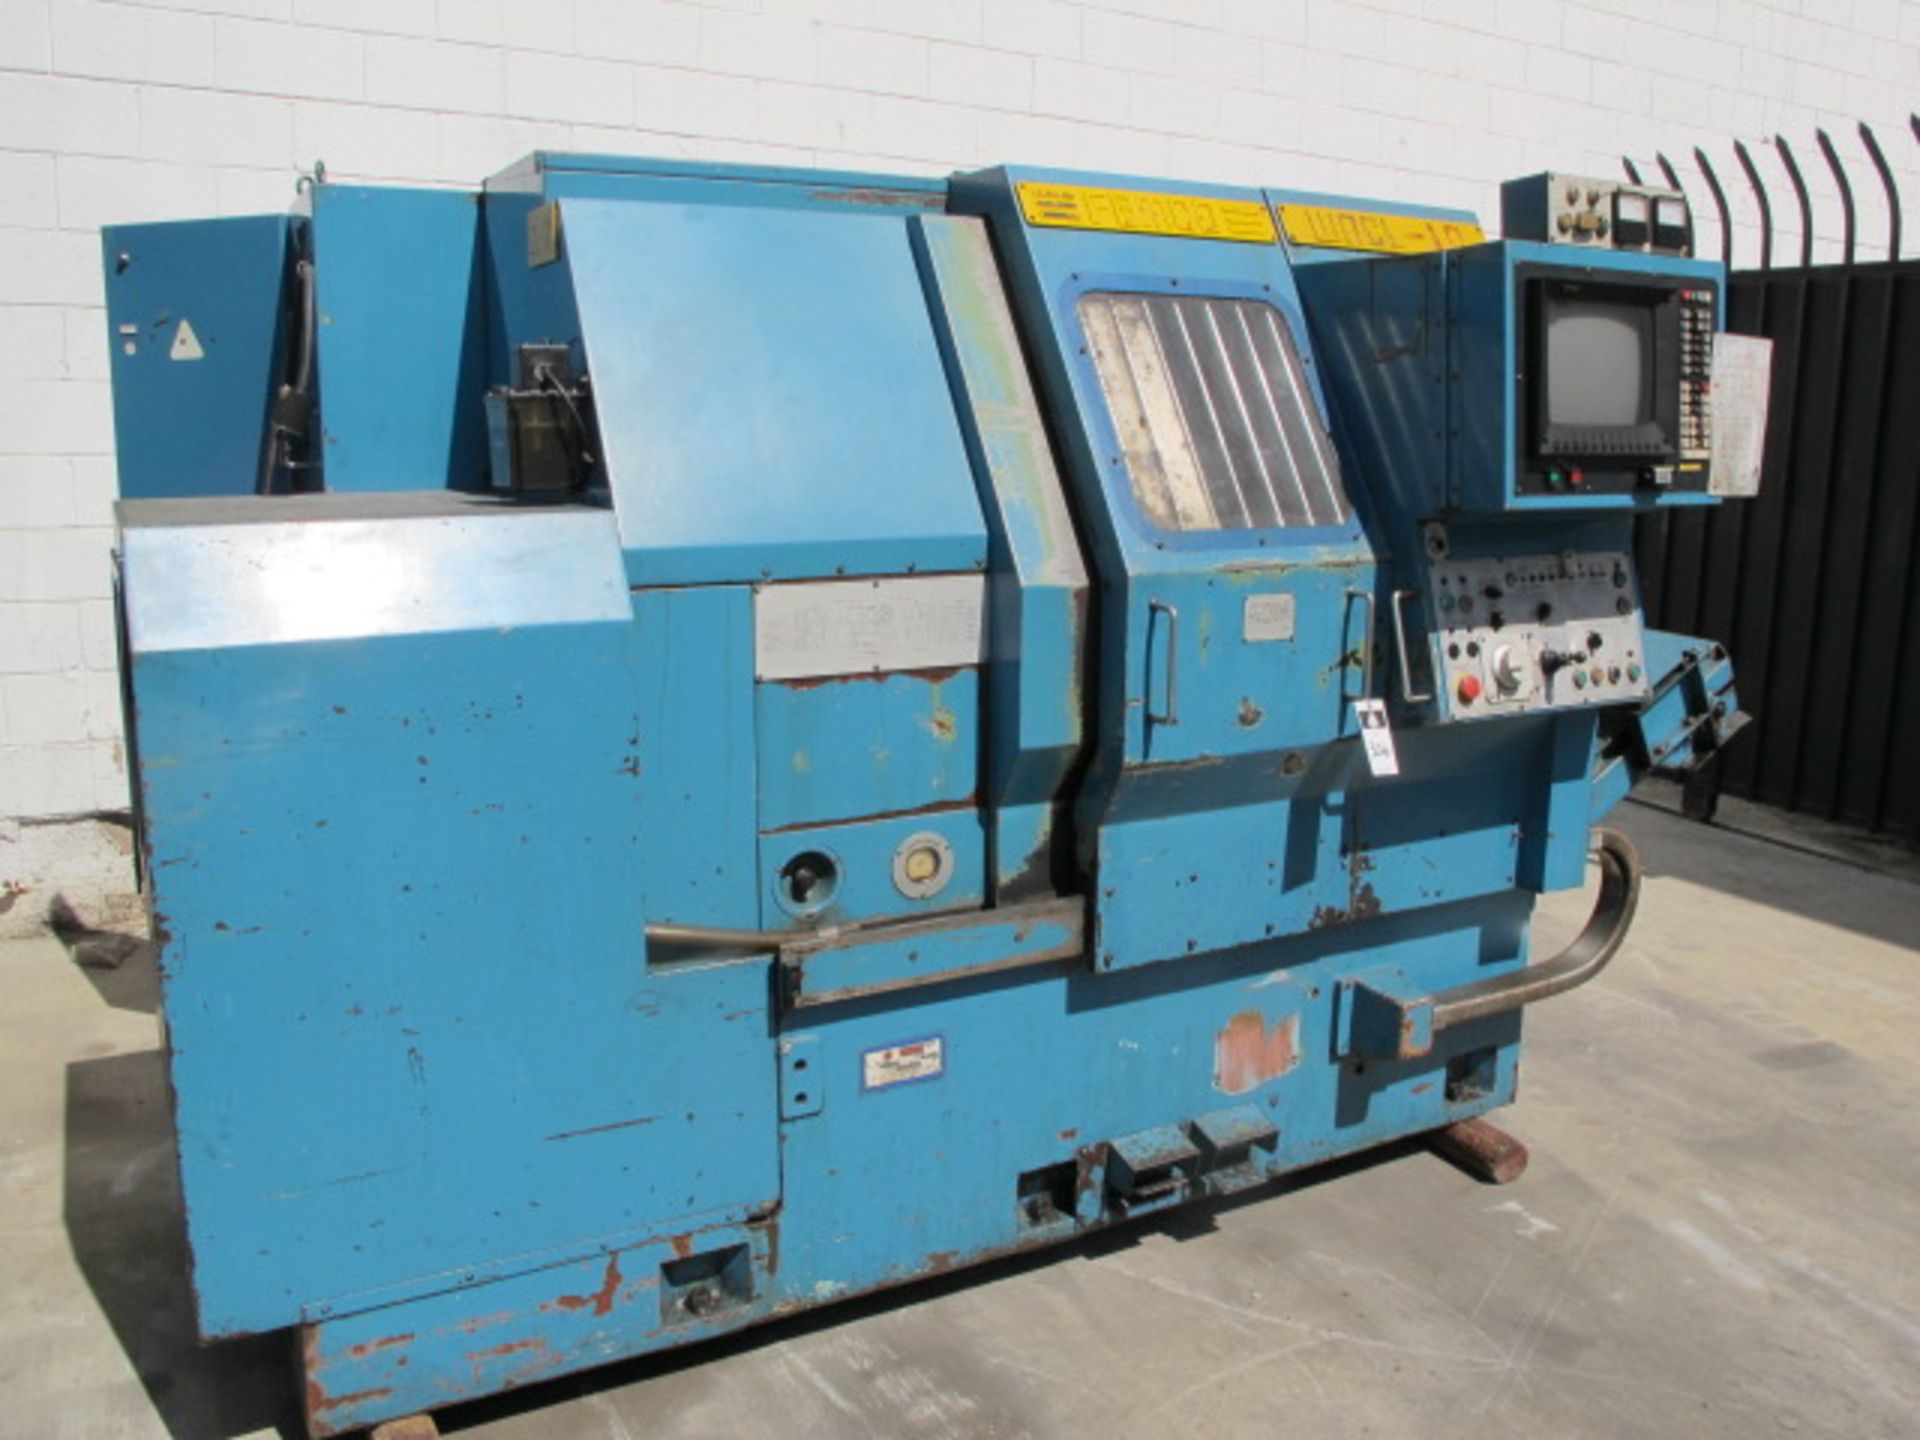 Femco WNCL-10/25 CNC Turning Center s/n 2001 w/ Fanuc System 10T Controls, 12-Station Turret, 5C - Image 2 of 7